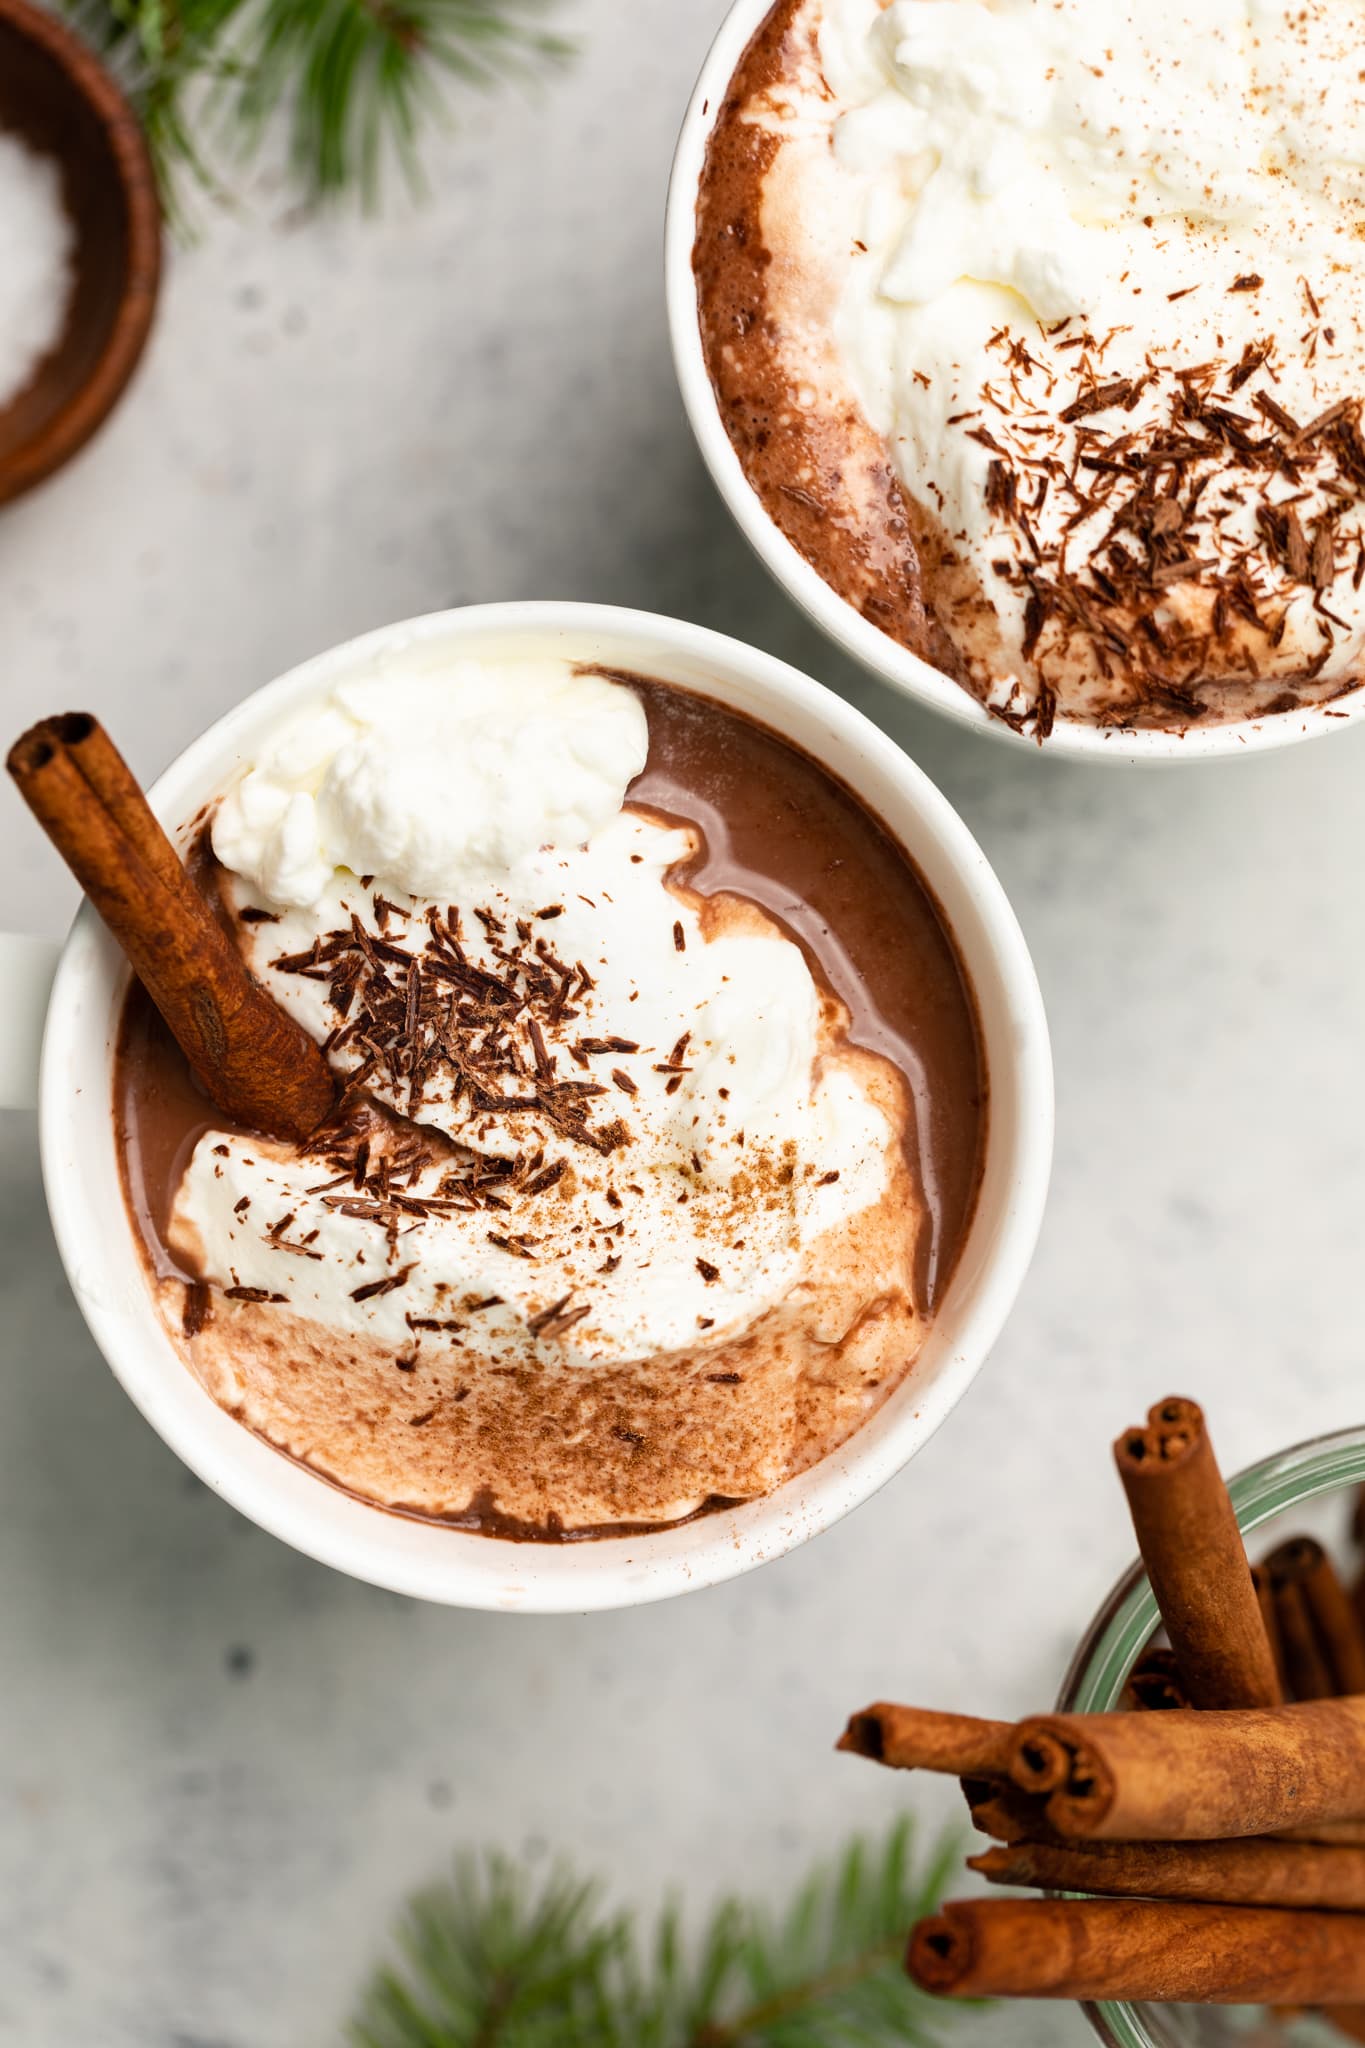 https://allthehealthythings.com/wp-content/uploads/2020/12/healthy-hot-chocolate-5.jpg